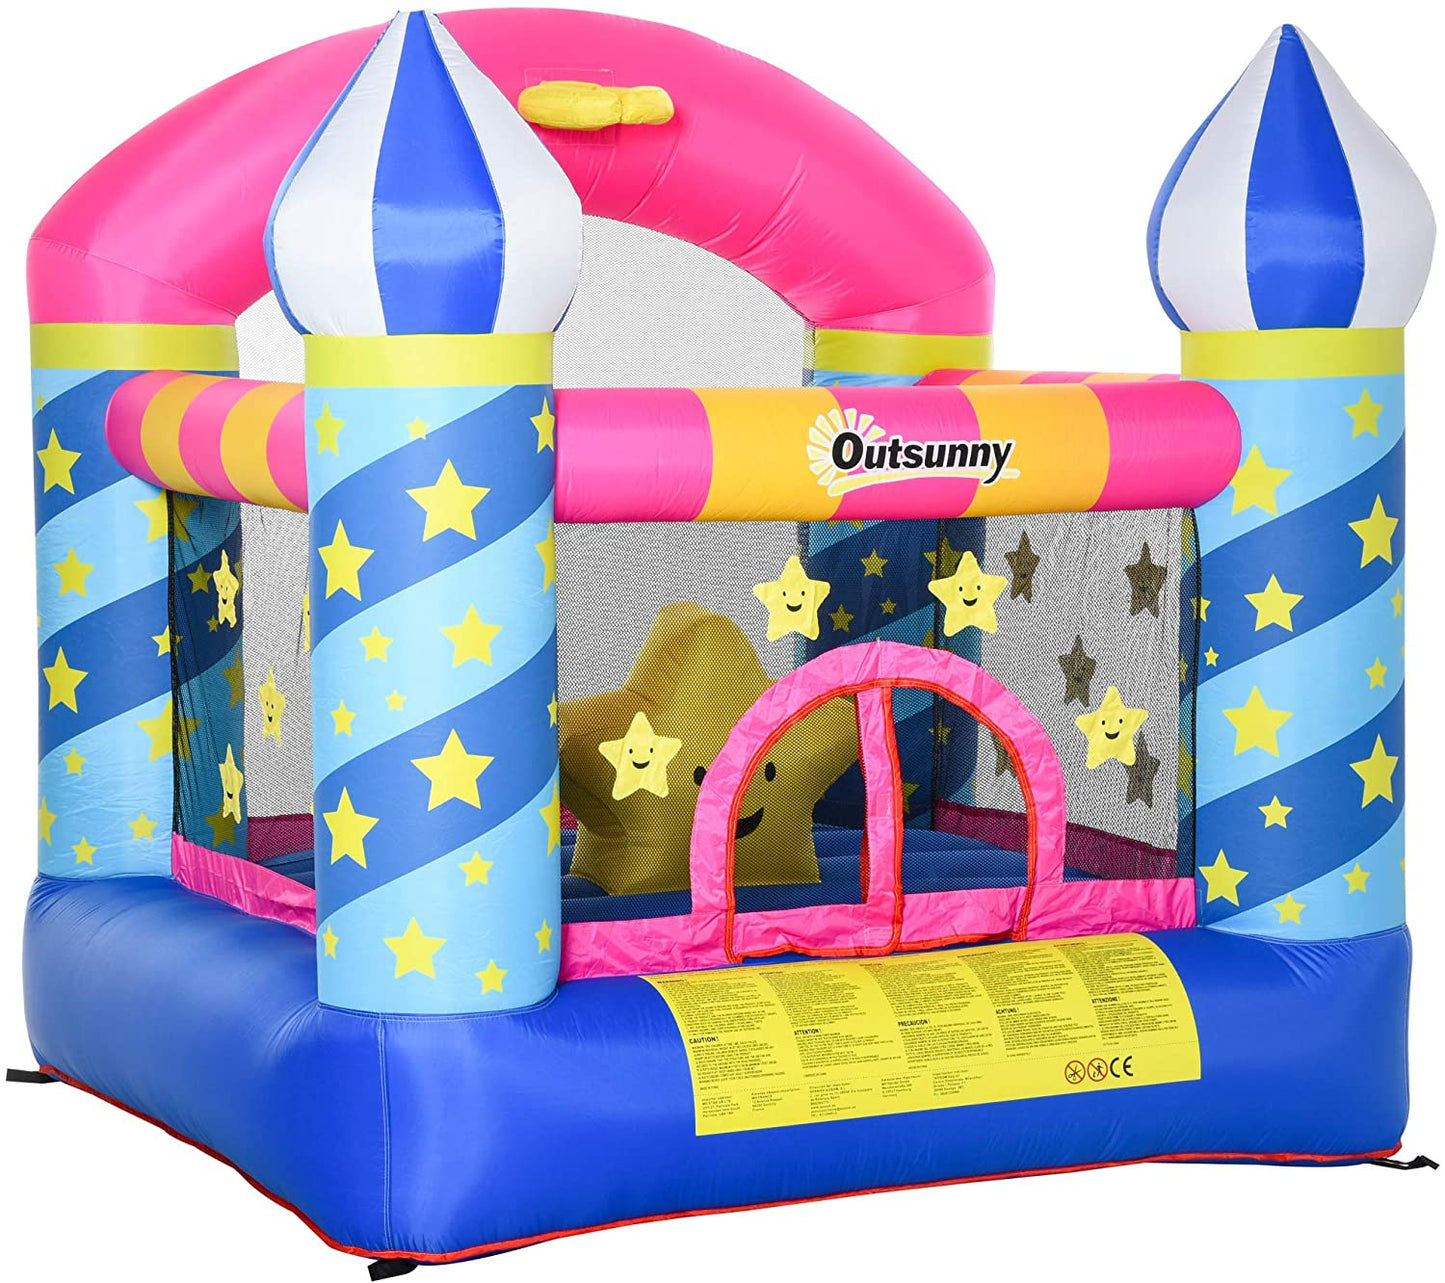 Outsunny Bounce Castle Inflatable Trampoline Slide Pool Octopus Design 3.8 x 2 x 1.8m